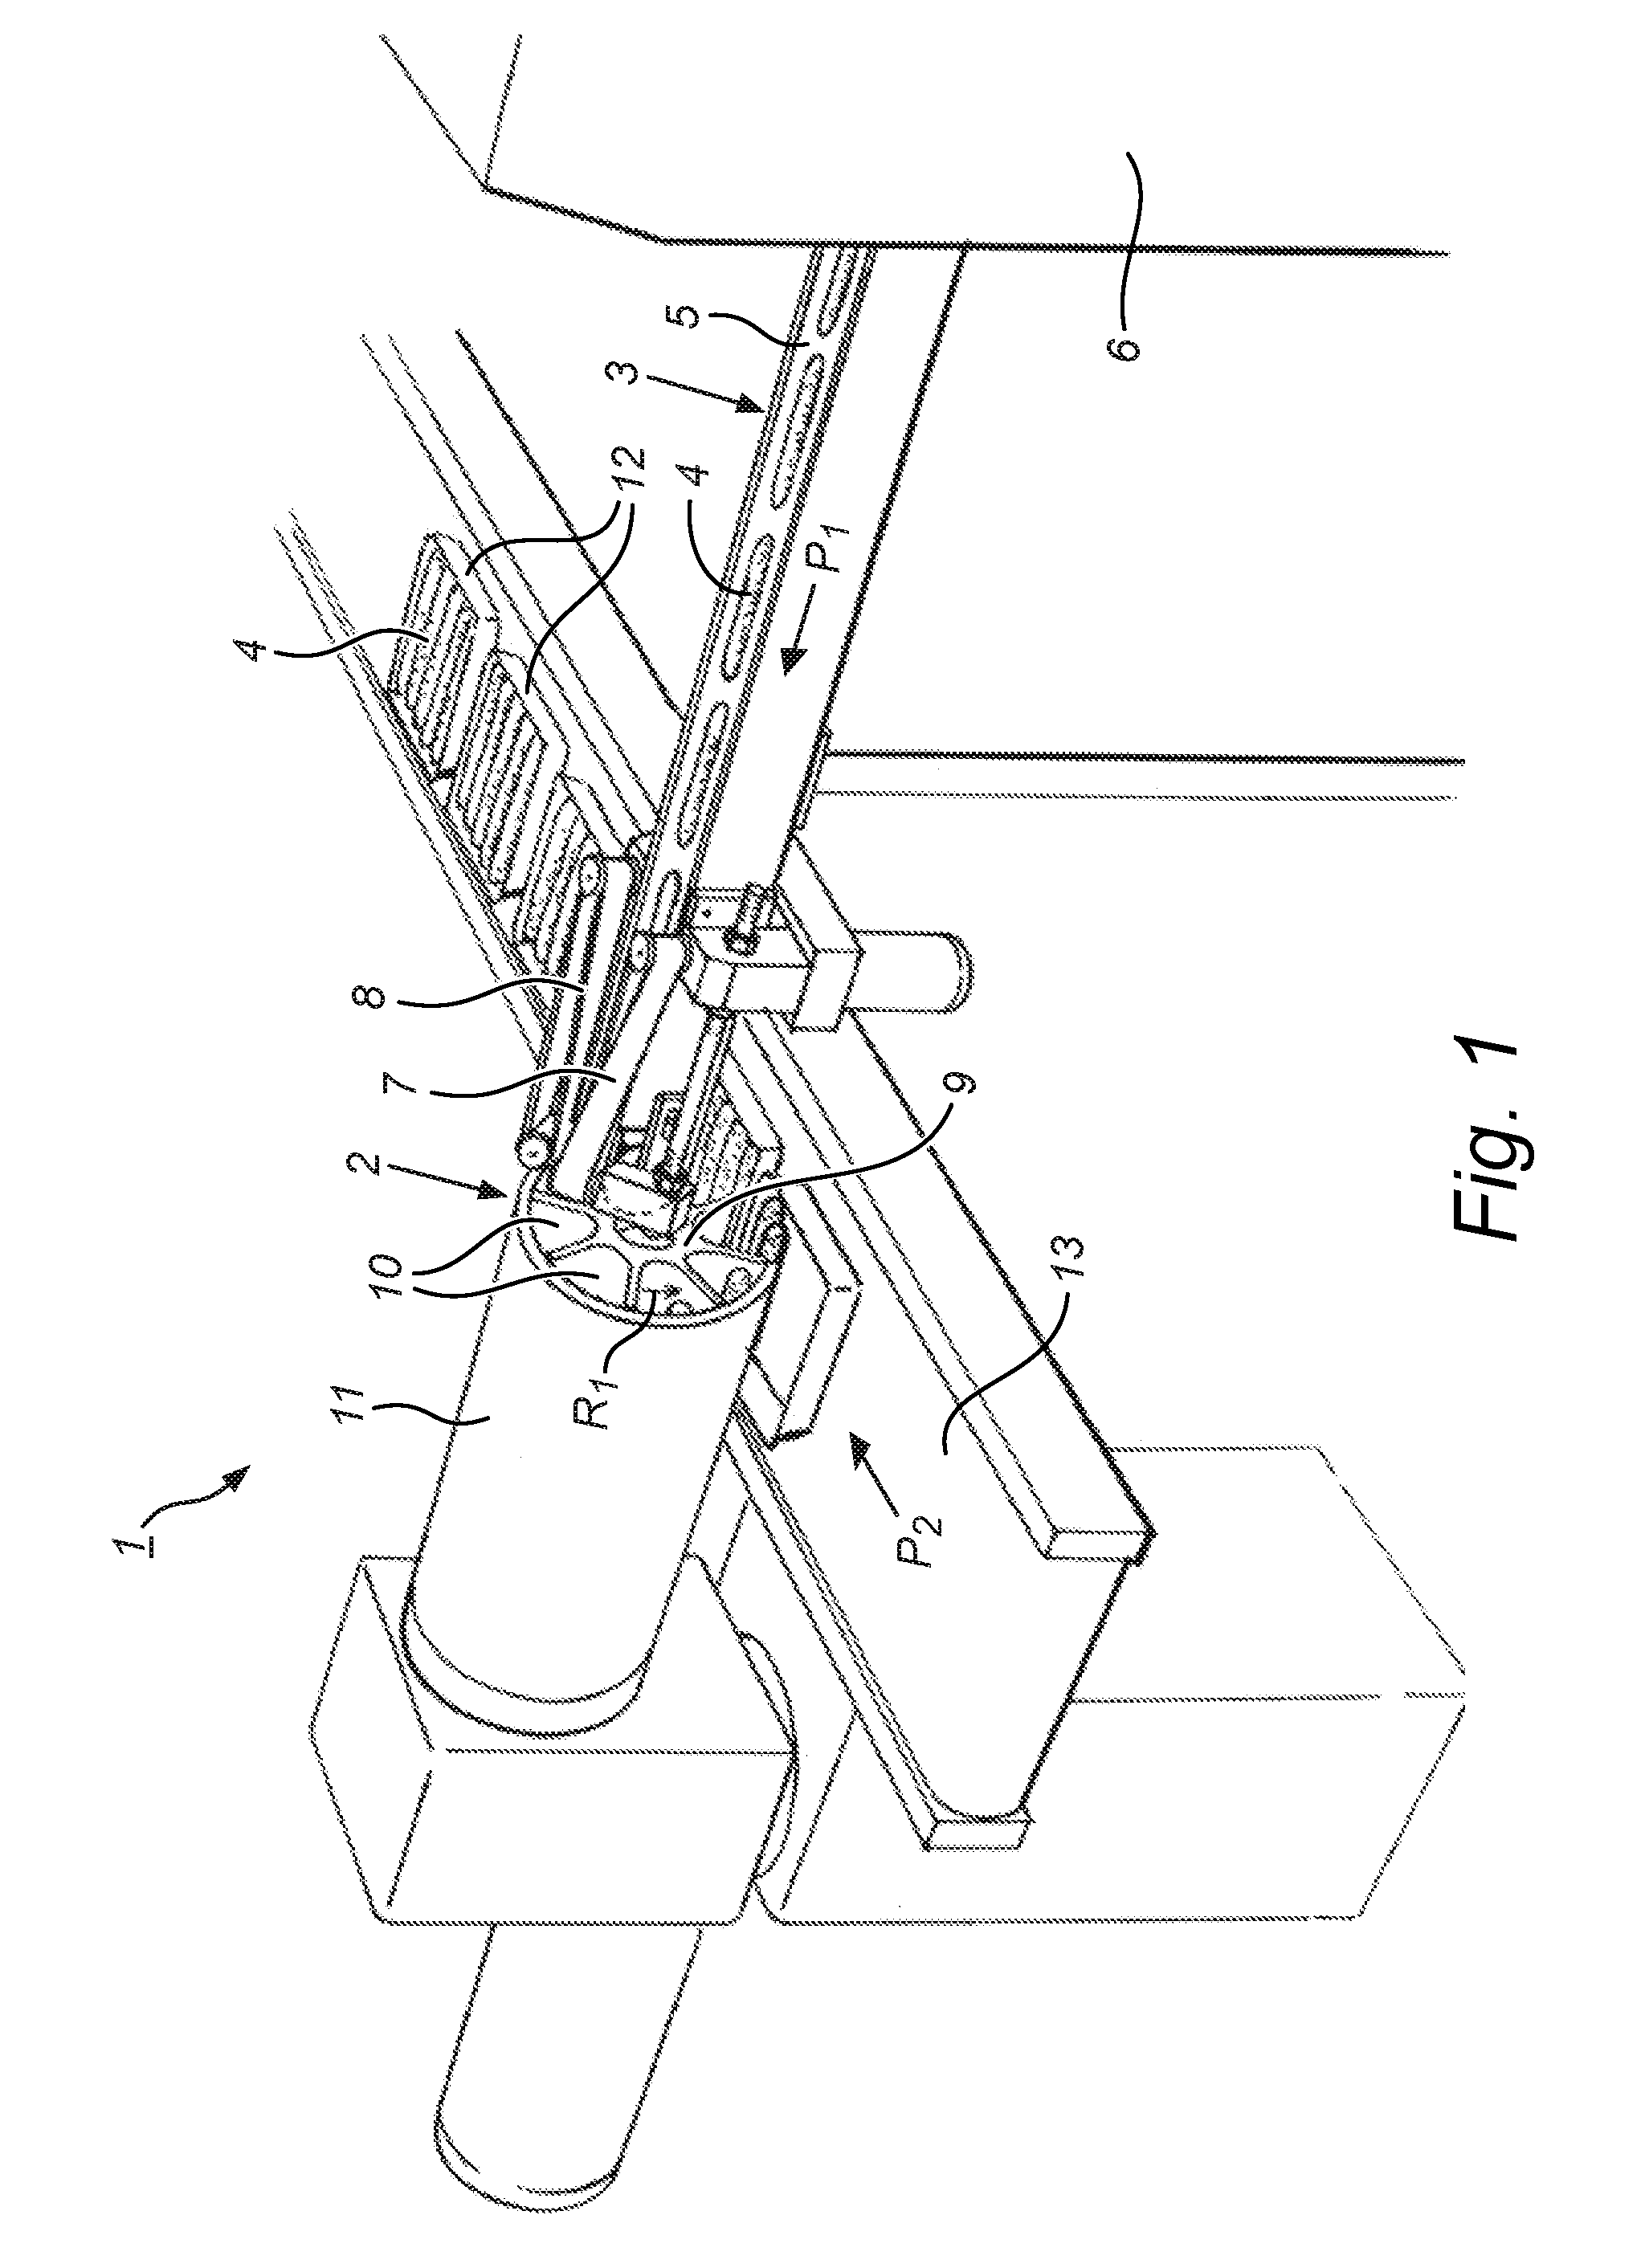 Device and method for transferring longitudinally supplied elongate food products